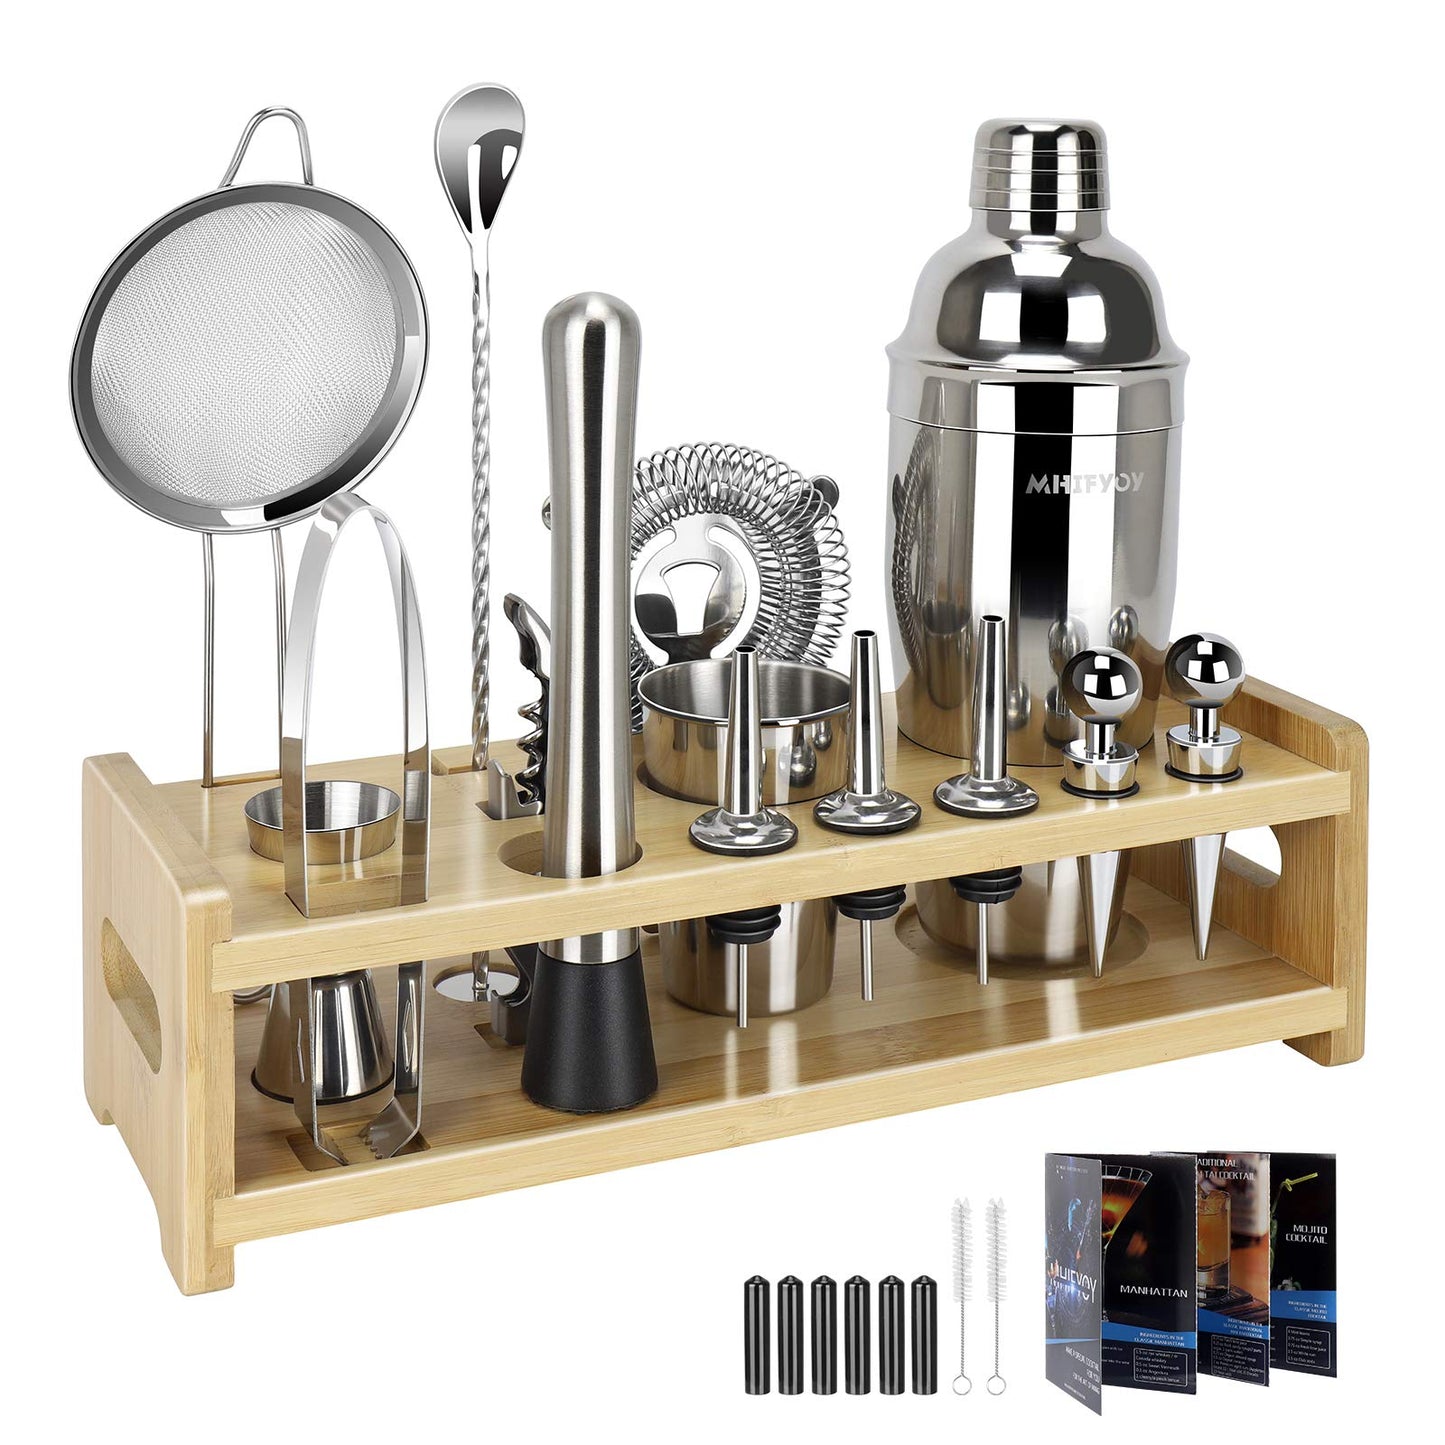 24-Piece Cocktail Shaker Set - MHIFYOY Bartender Kit - Stainless Steel Martini Mixer Bar Tools with Bamboo Stand, Ideal Gift Pack & Fine Mesh Strainer(Silver)